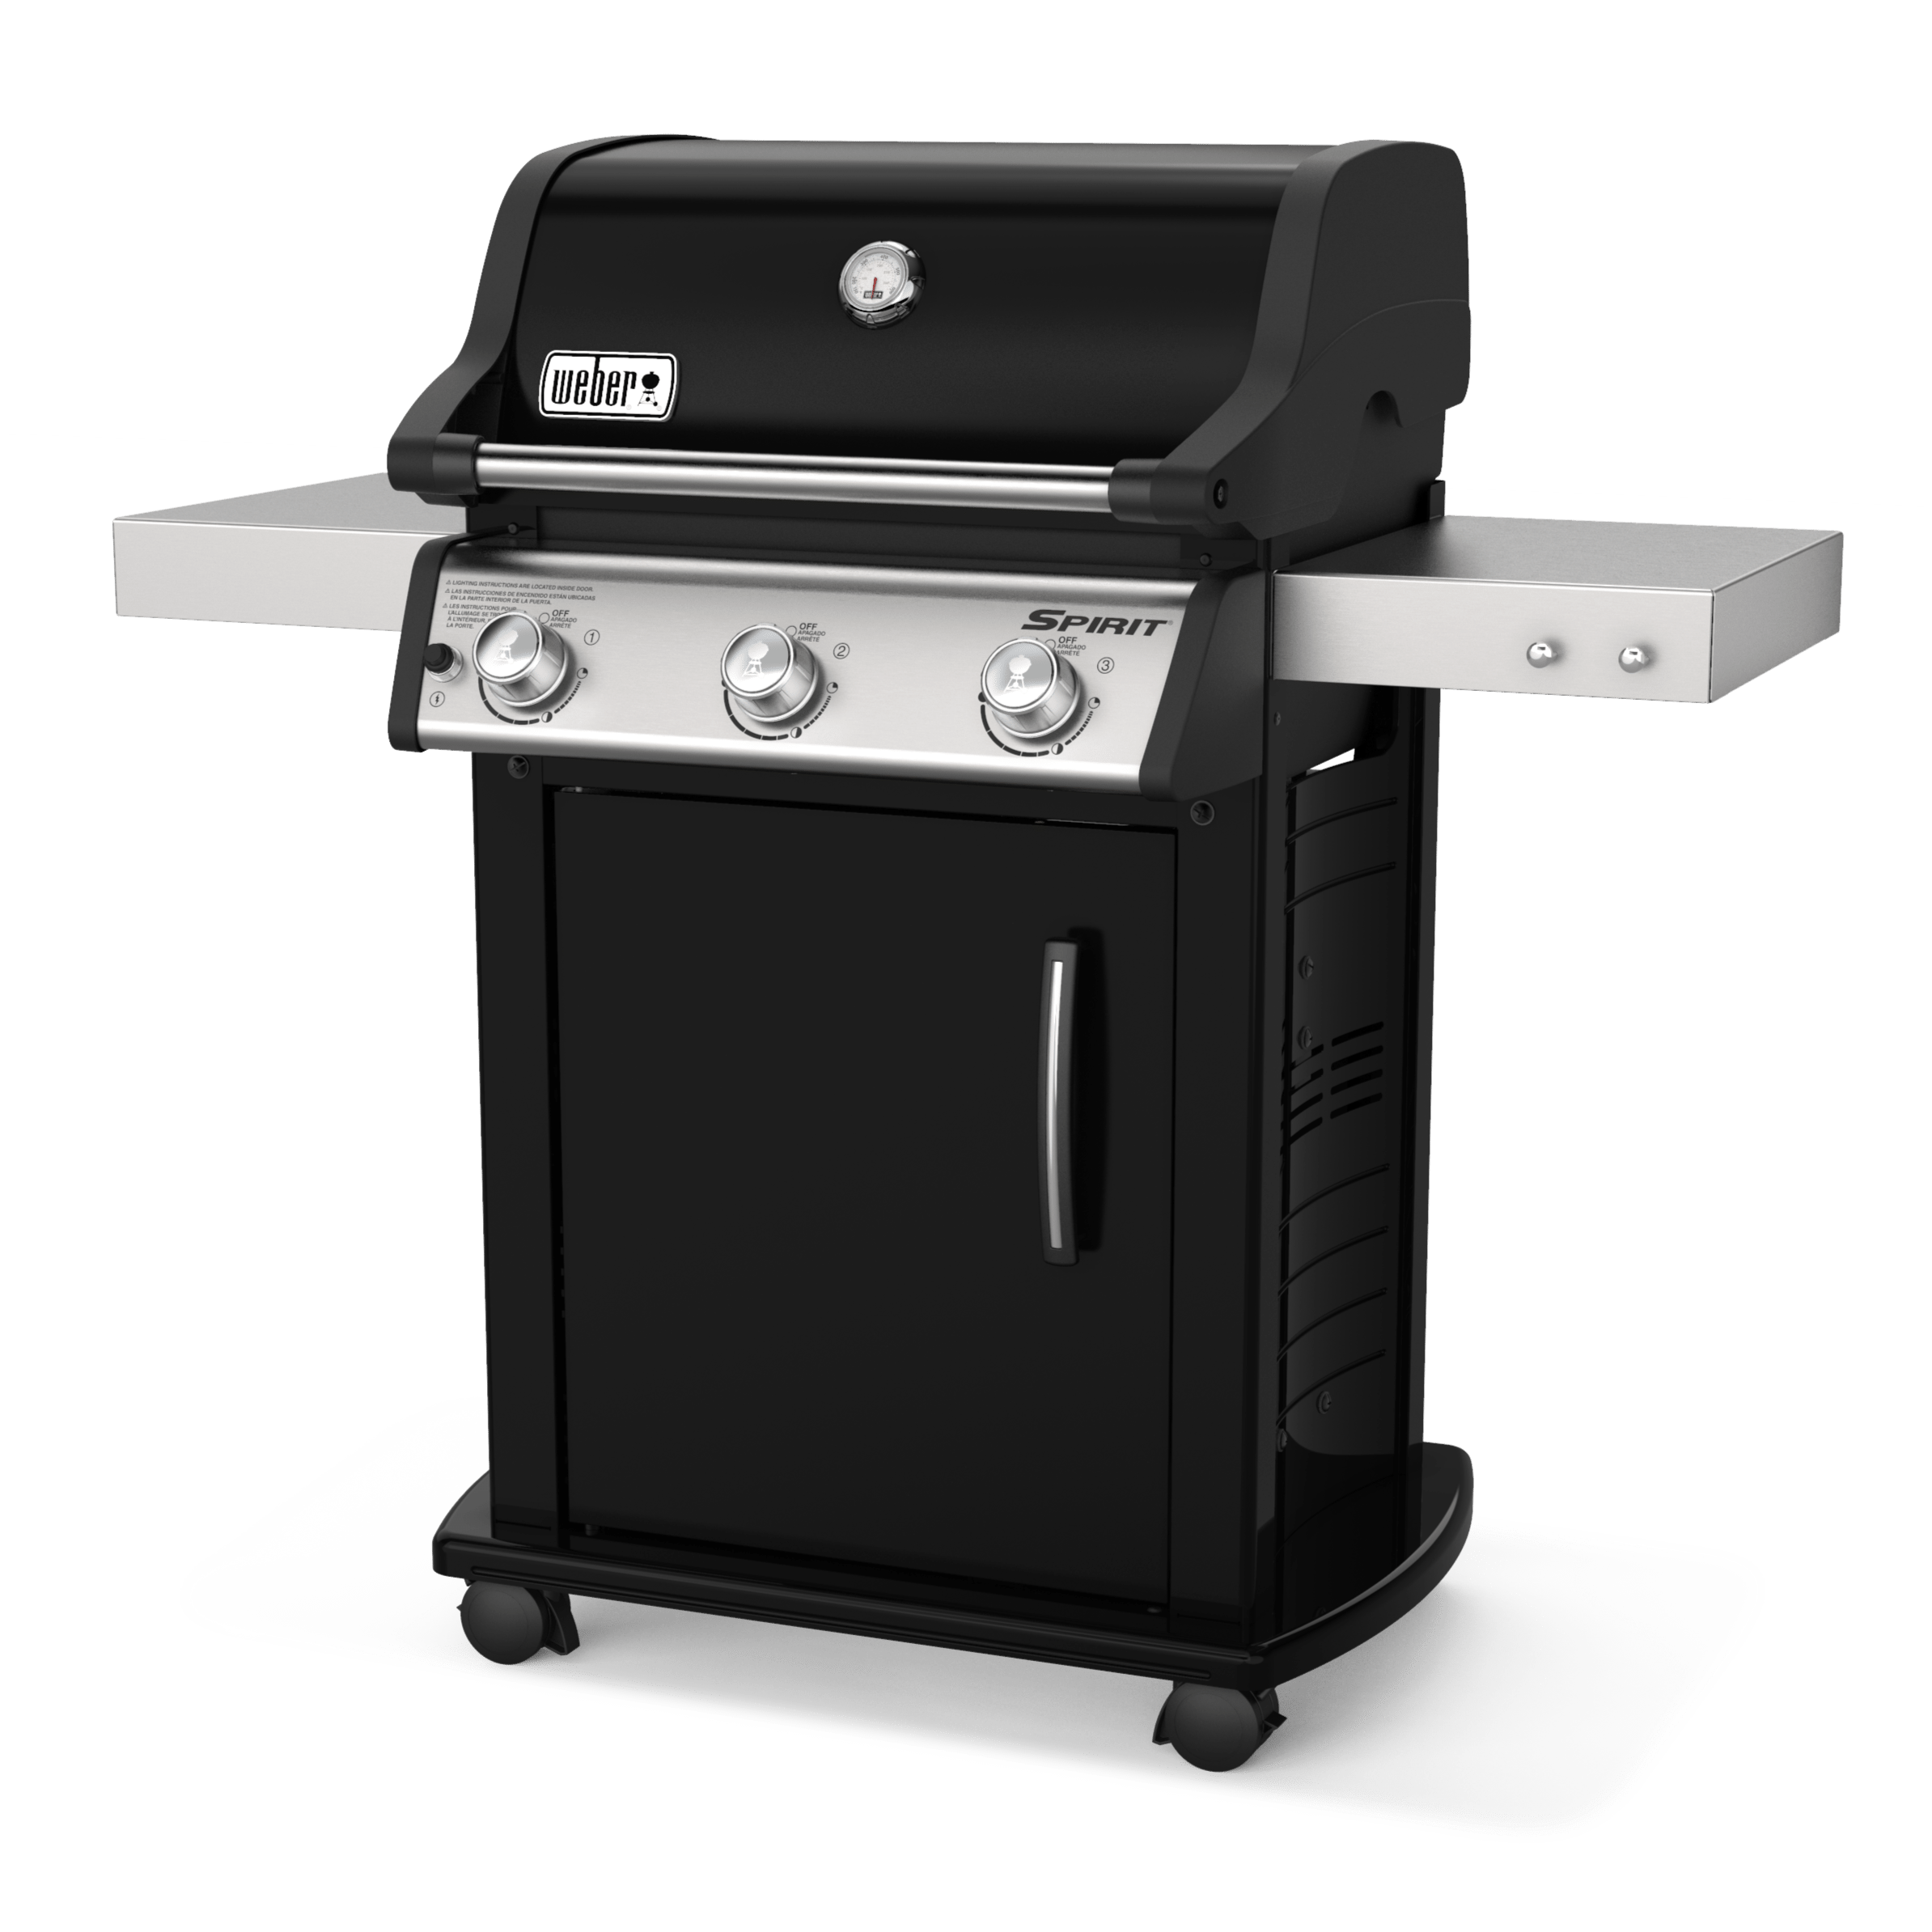 Weber Weber Spirit E-315 3-Burner BBQ in Black with Cast-Iron Cooking Grates Freestanding Gas Grill